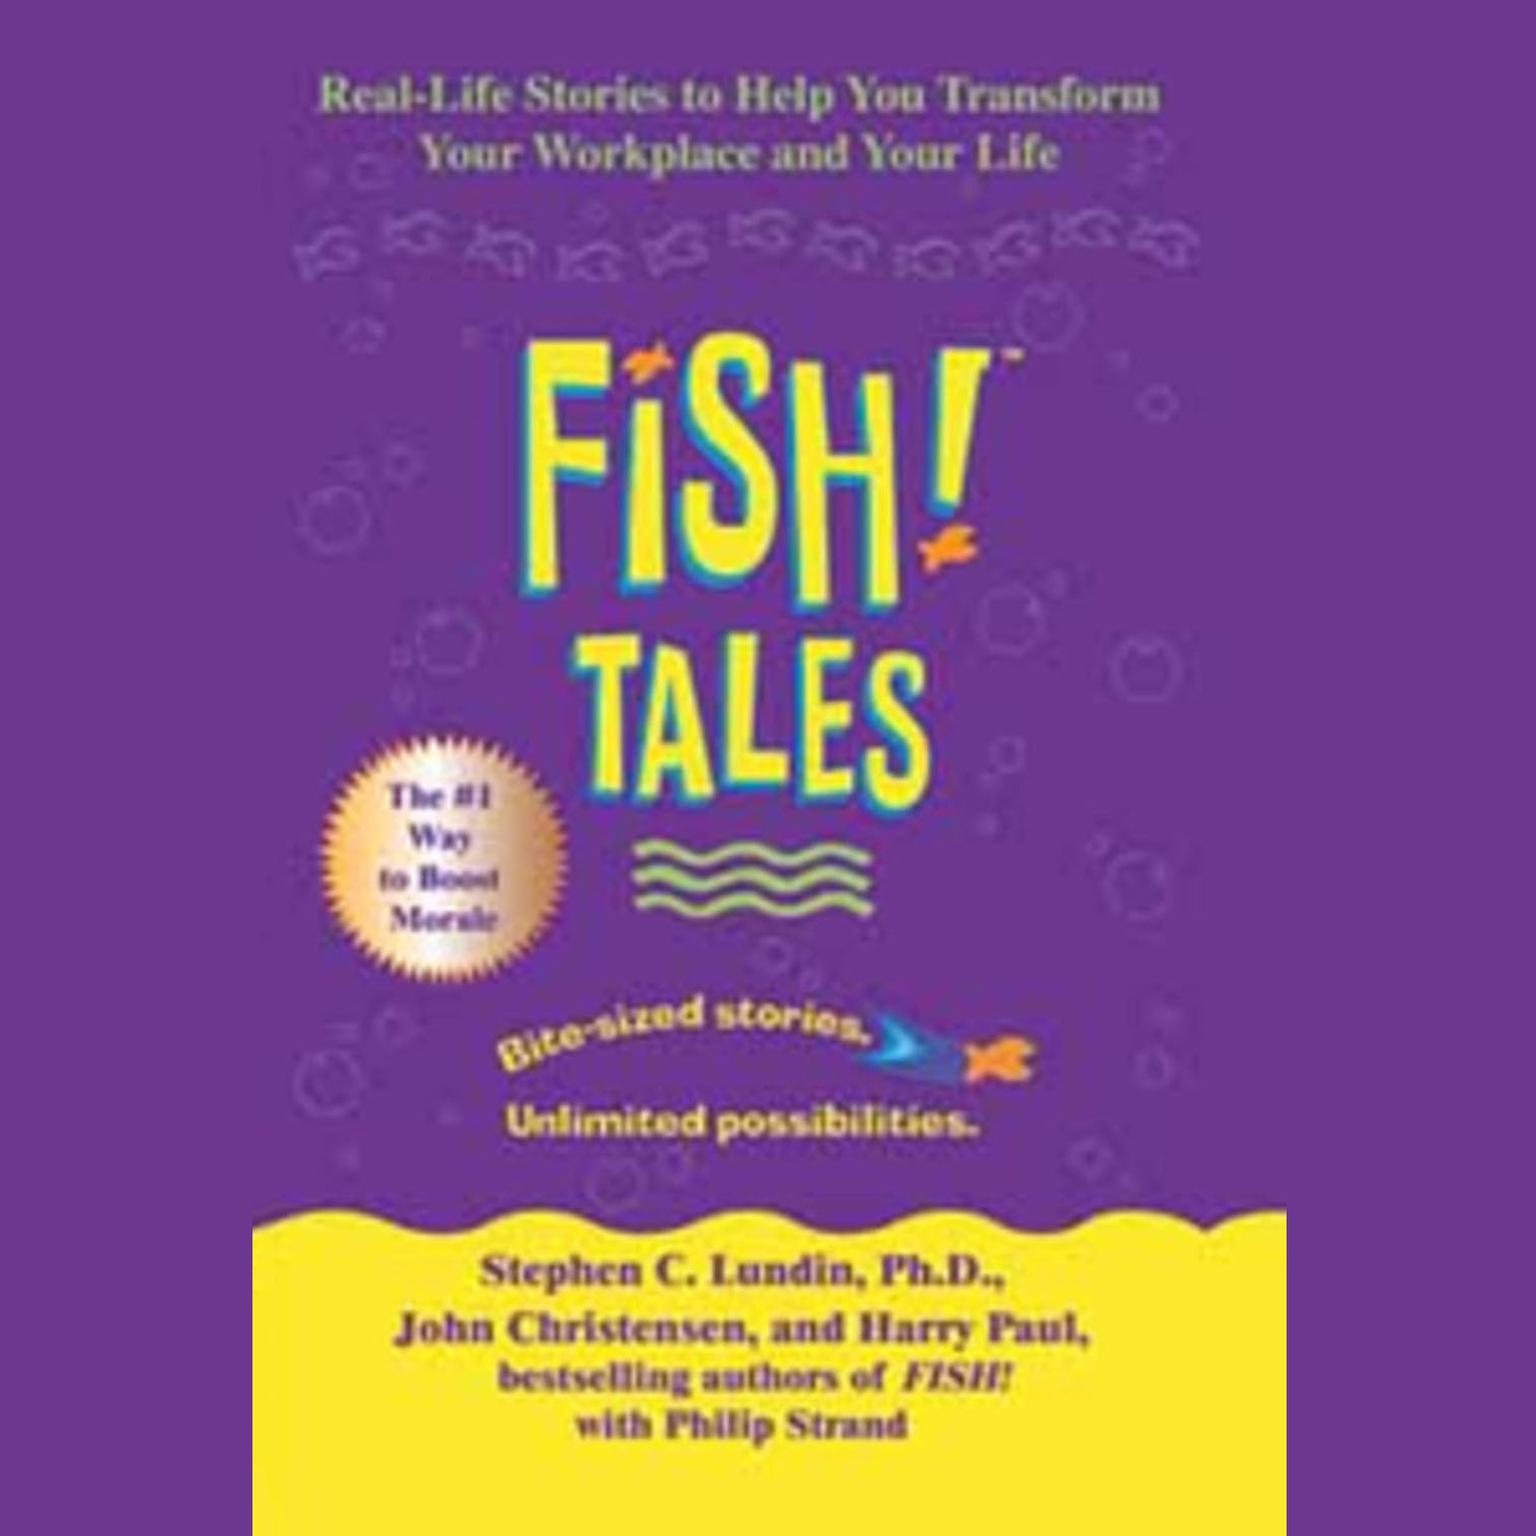 Fish! Tales (Abridged): Real-Life Stories to Help You Transform Your Workplace and Your Life Audiobook, by Stephen C.  Lundin